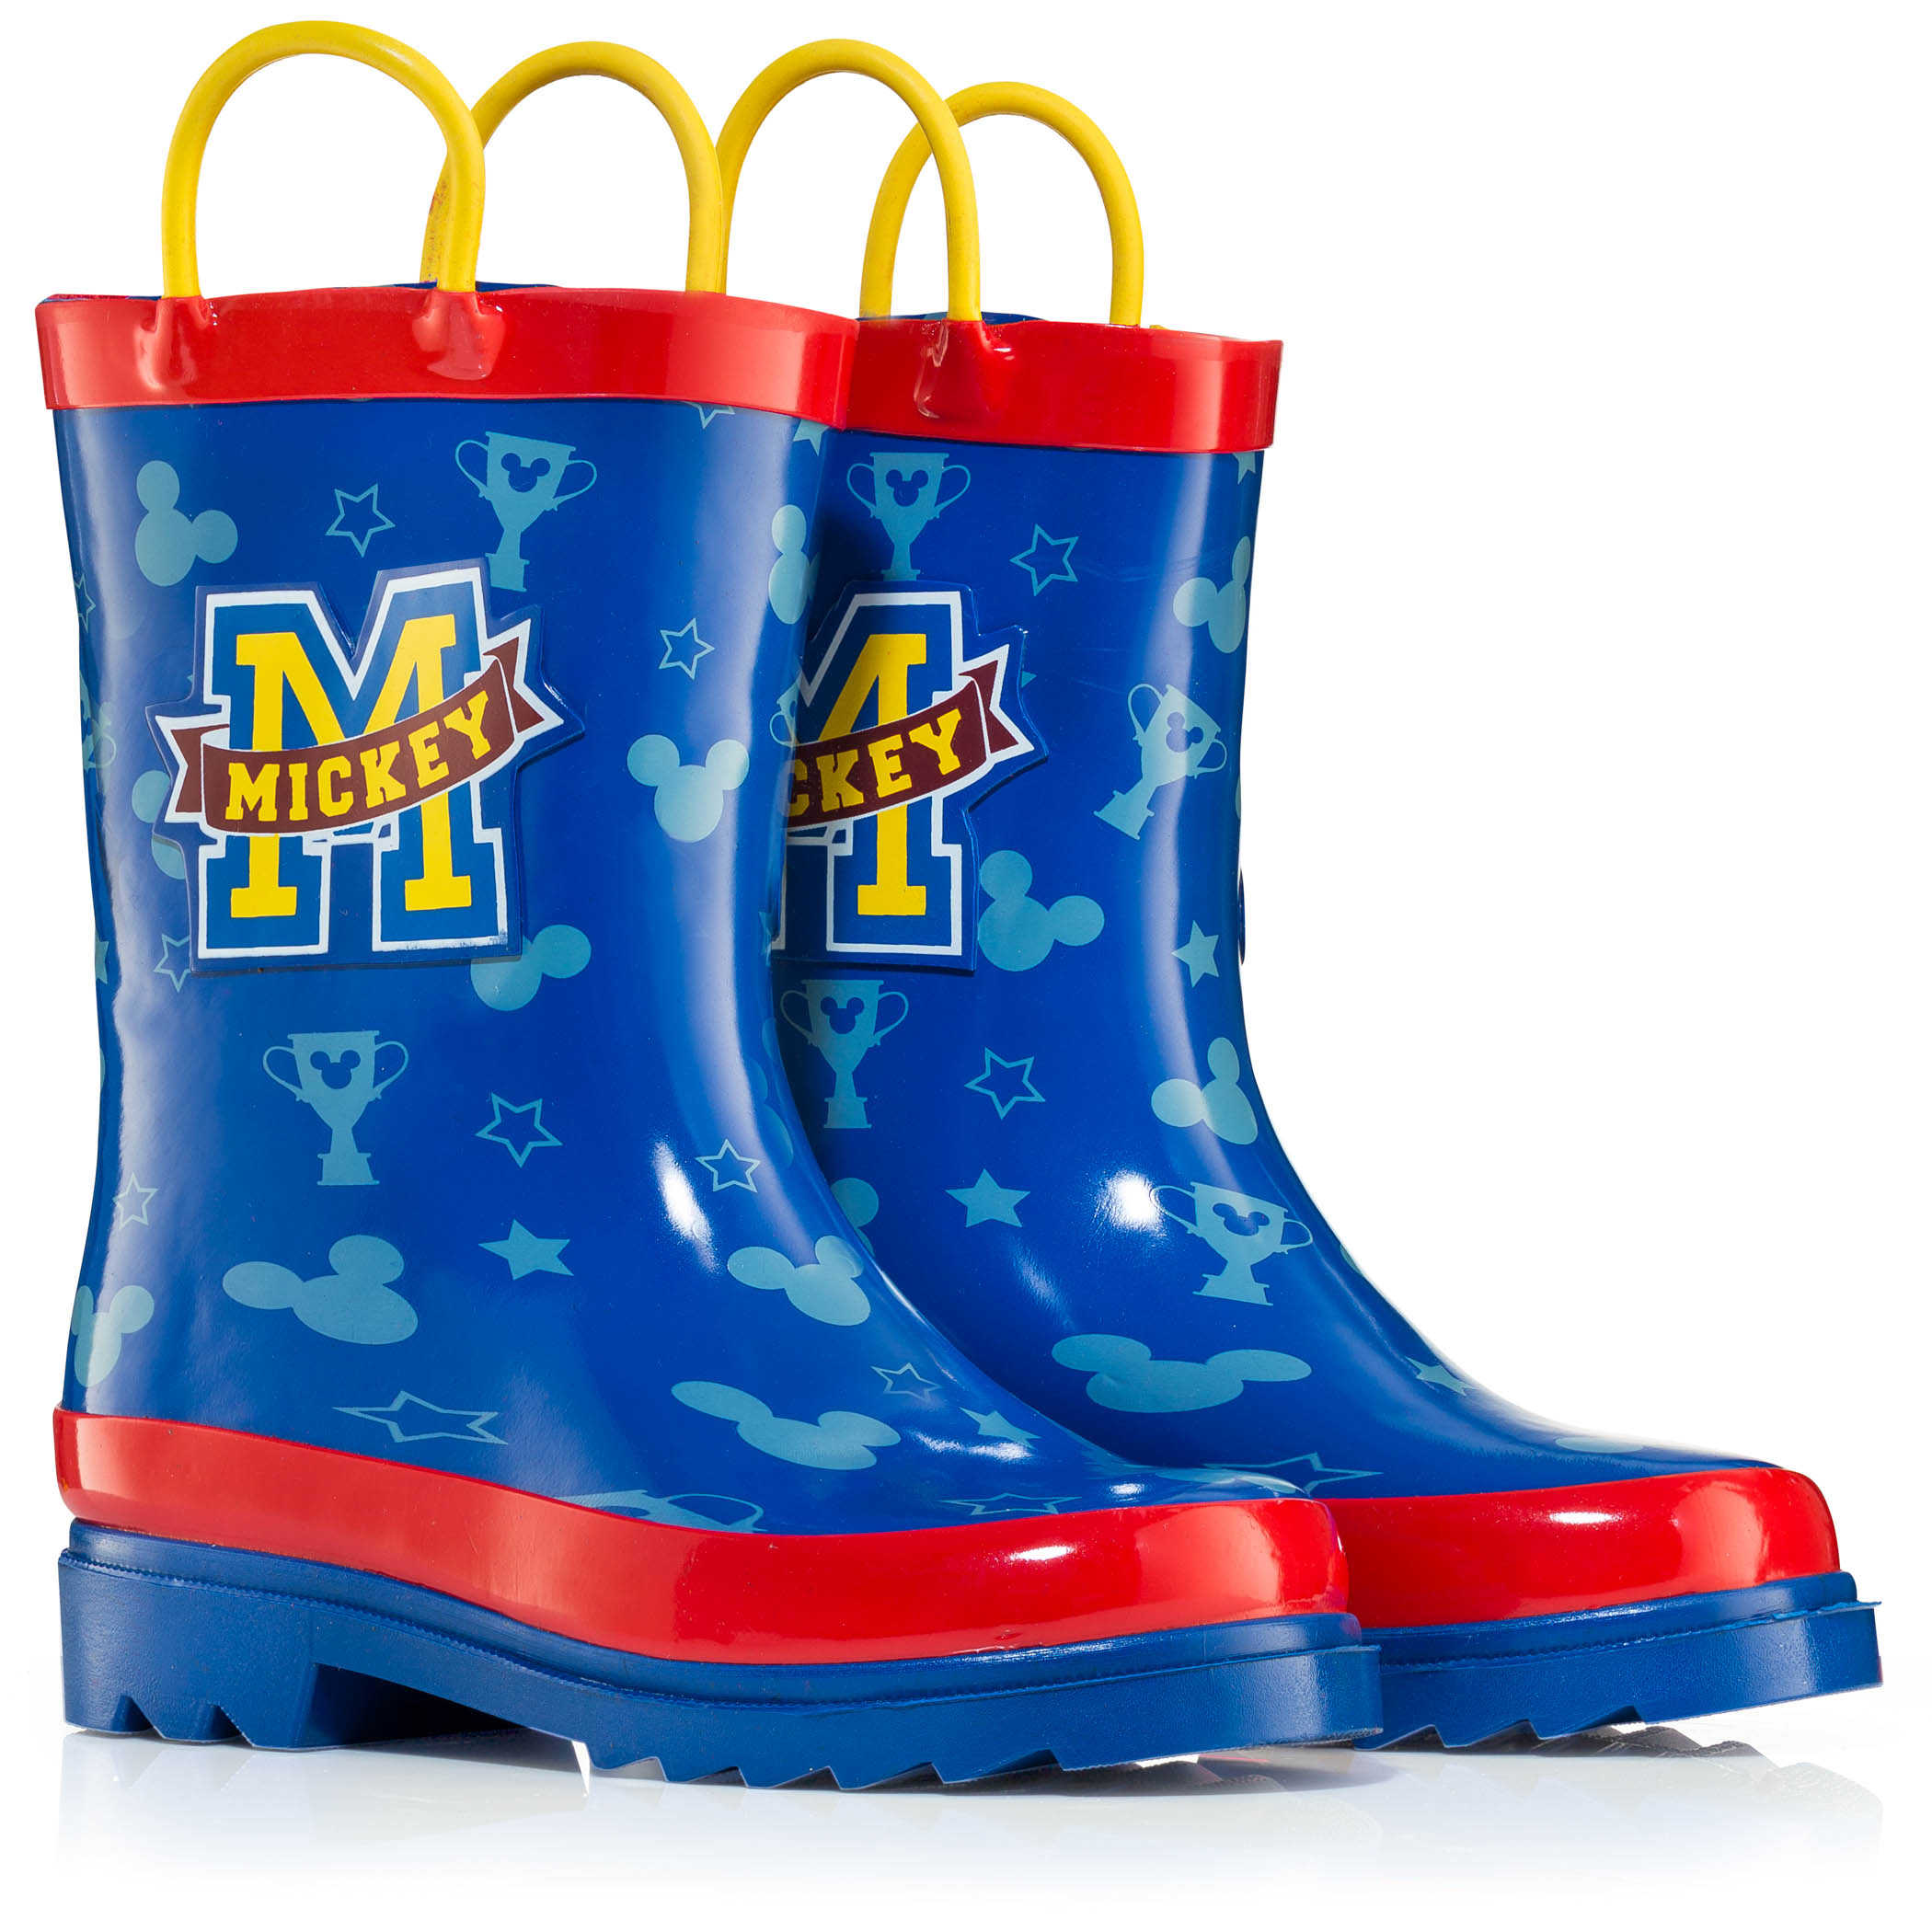 Disney Mickey Mouse Blue Rubber Rain Boots - Size 5 toddler - image 4 of 6